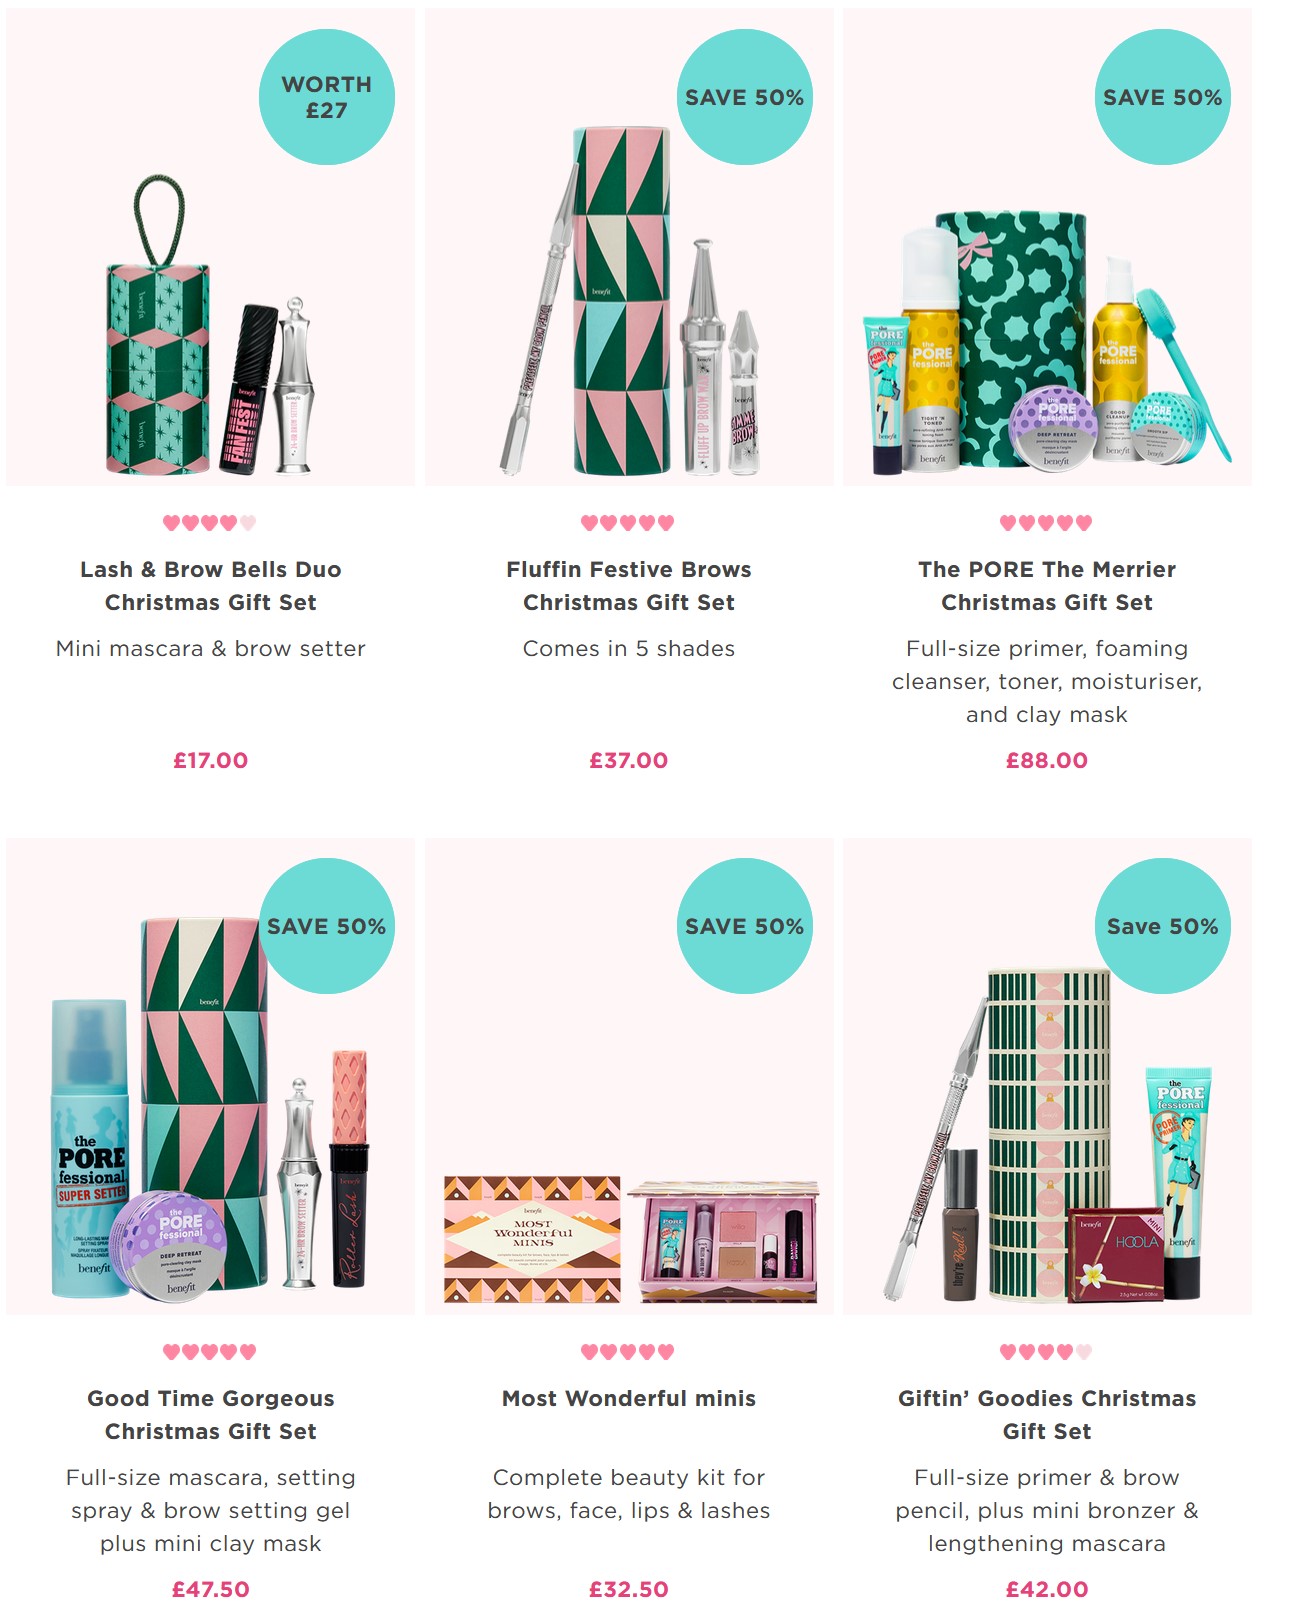 20% off sitewide at Benefit